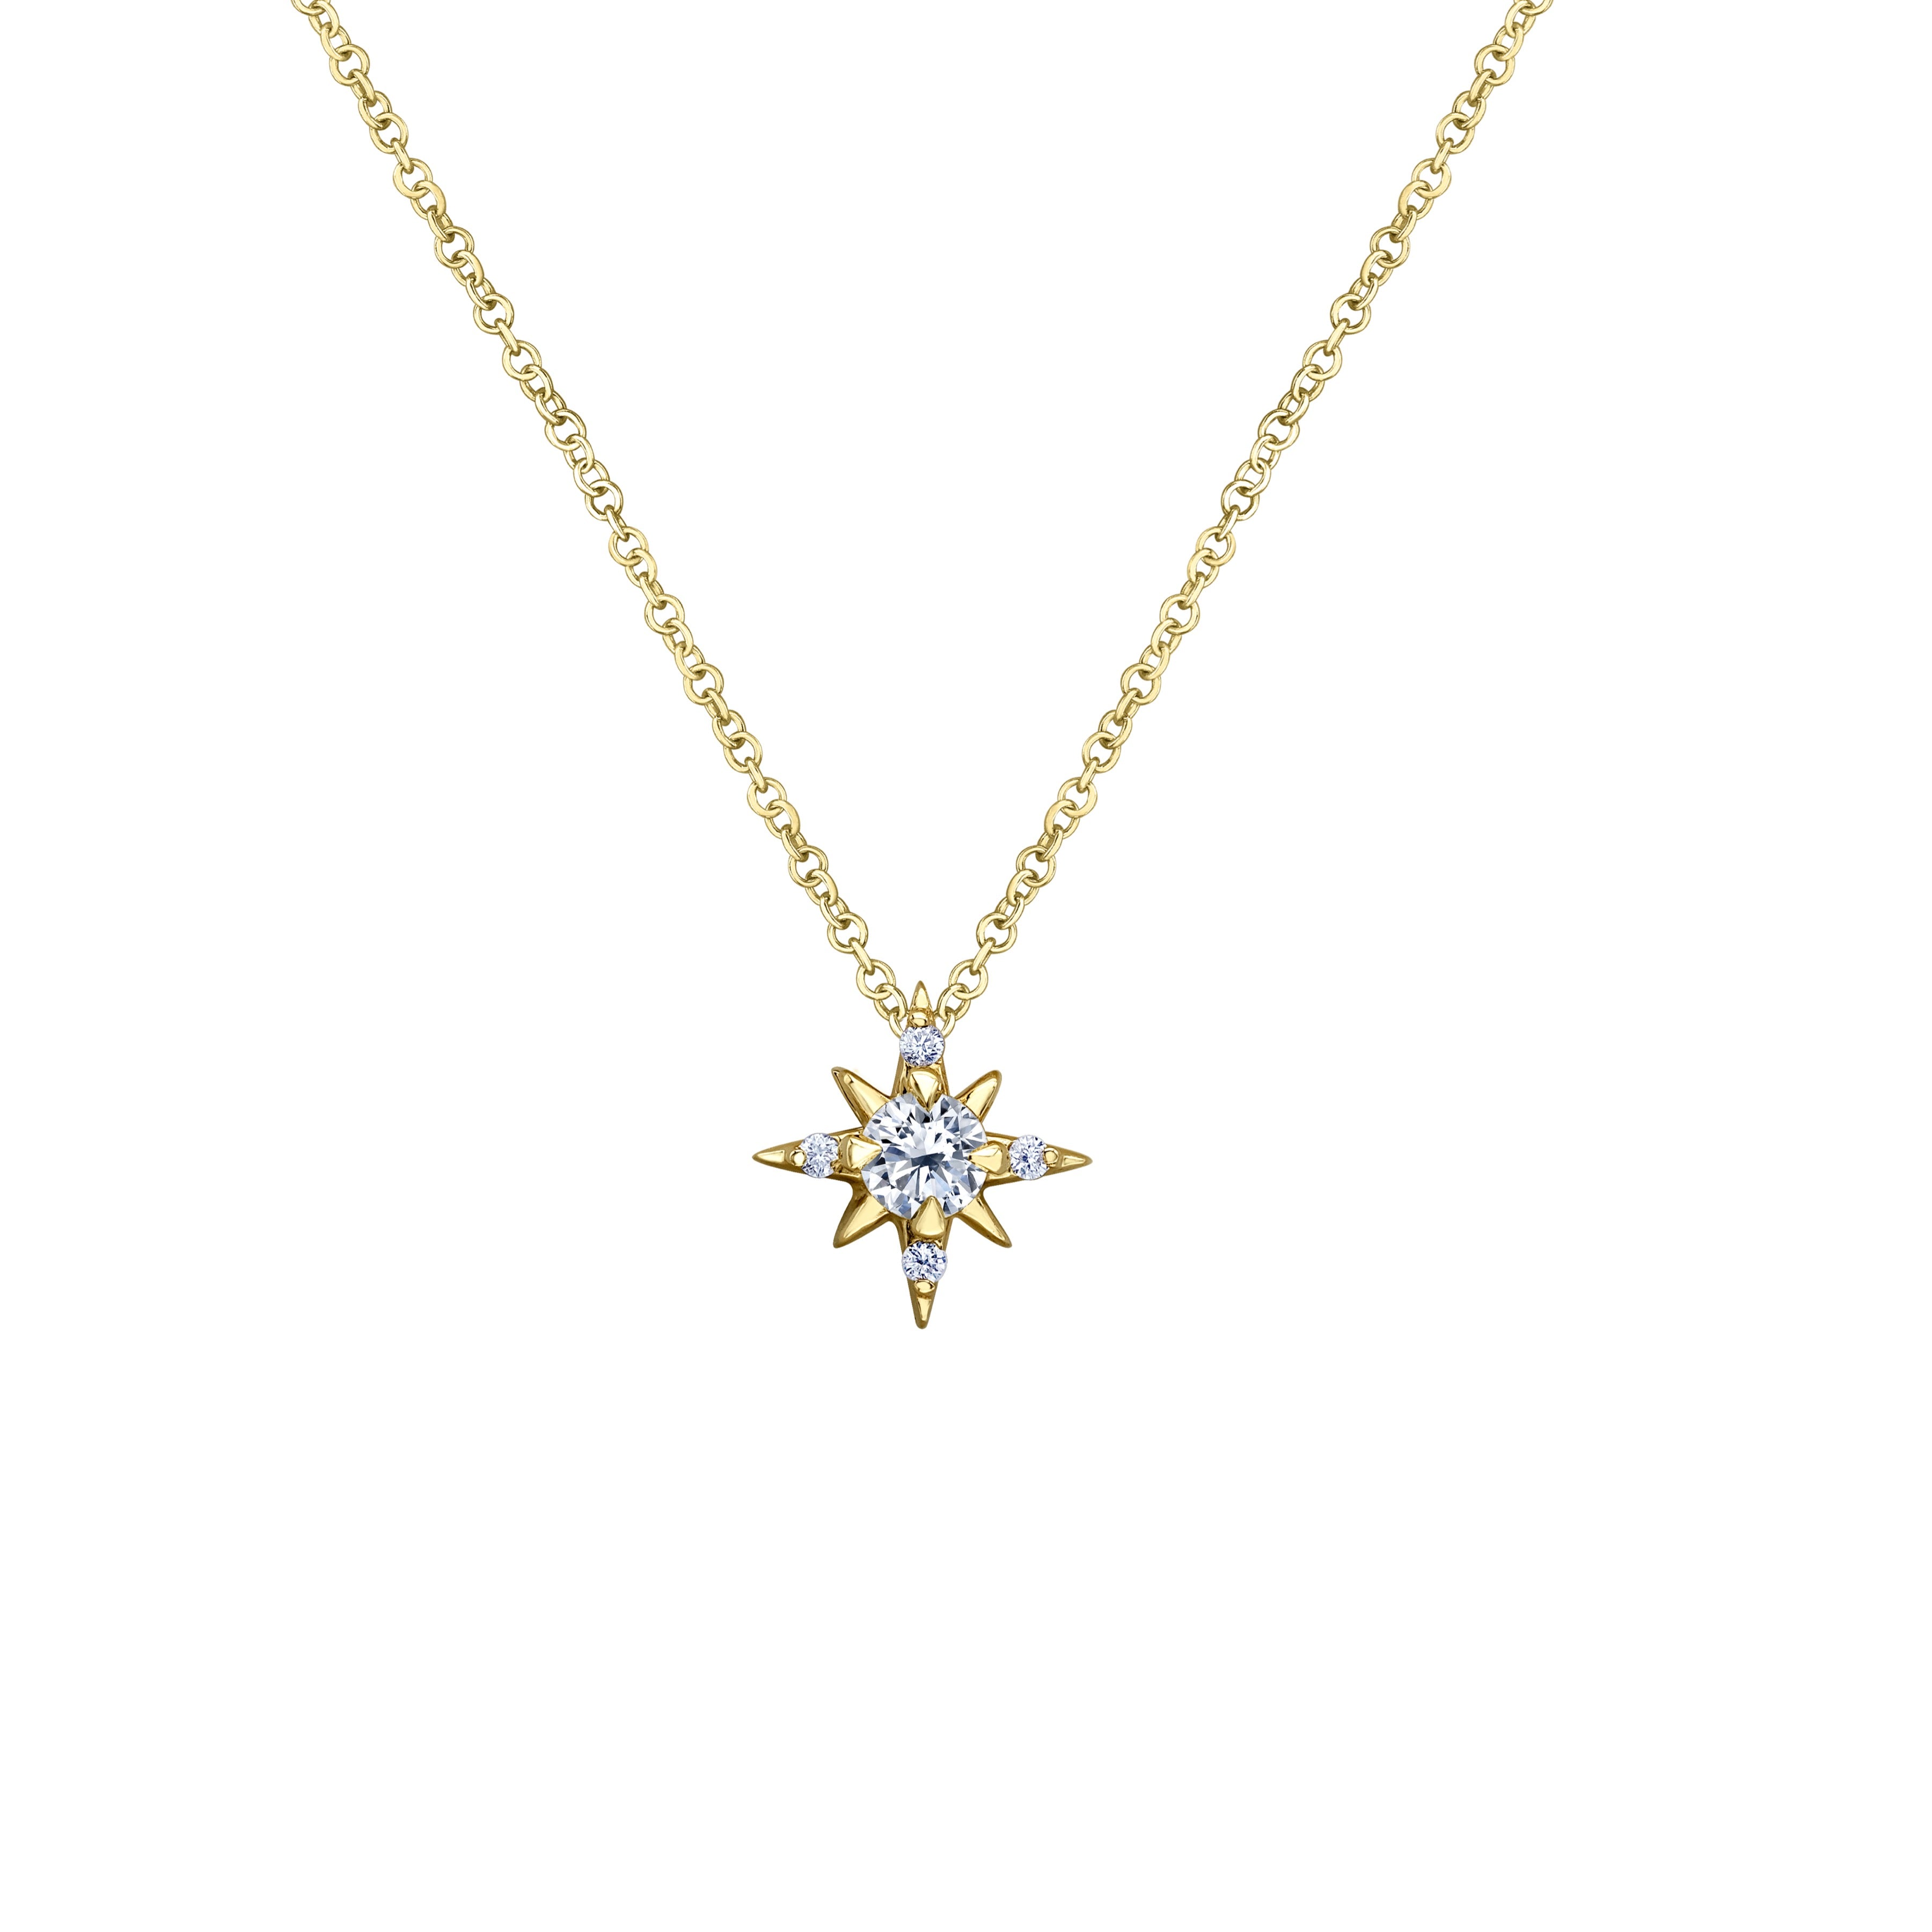 Crafted in 14KT yellow Certified Canadian Gold, this pendant features the north star set with round brilliant-cut Canadian diamonds.